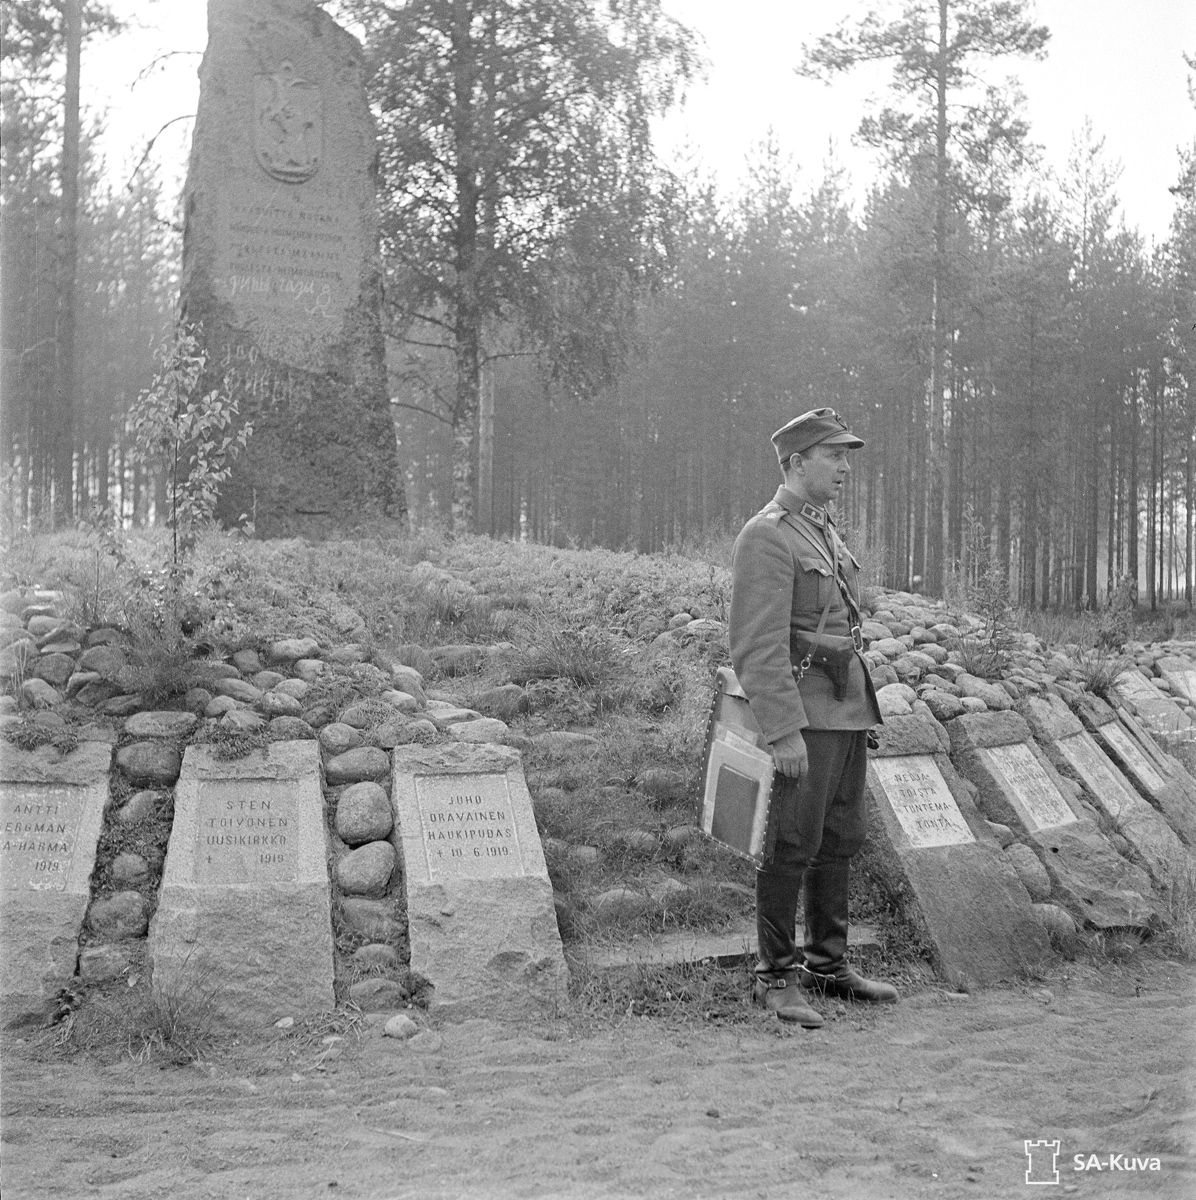 July 21, 1941. Tulema. General Paavo Talvela near the Monument to the Fallen in Olonets expedition